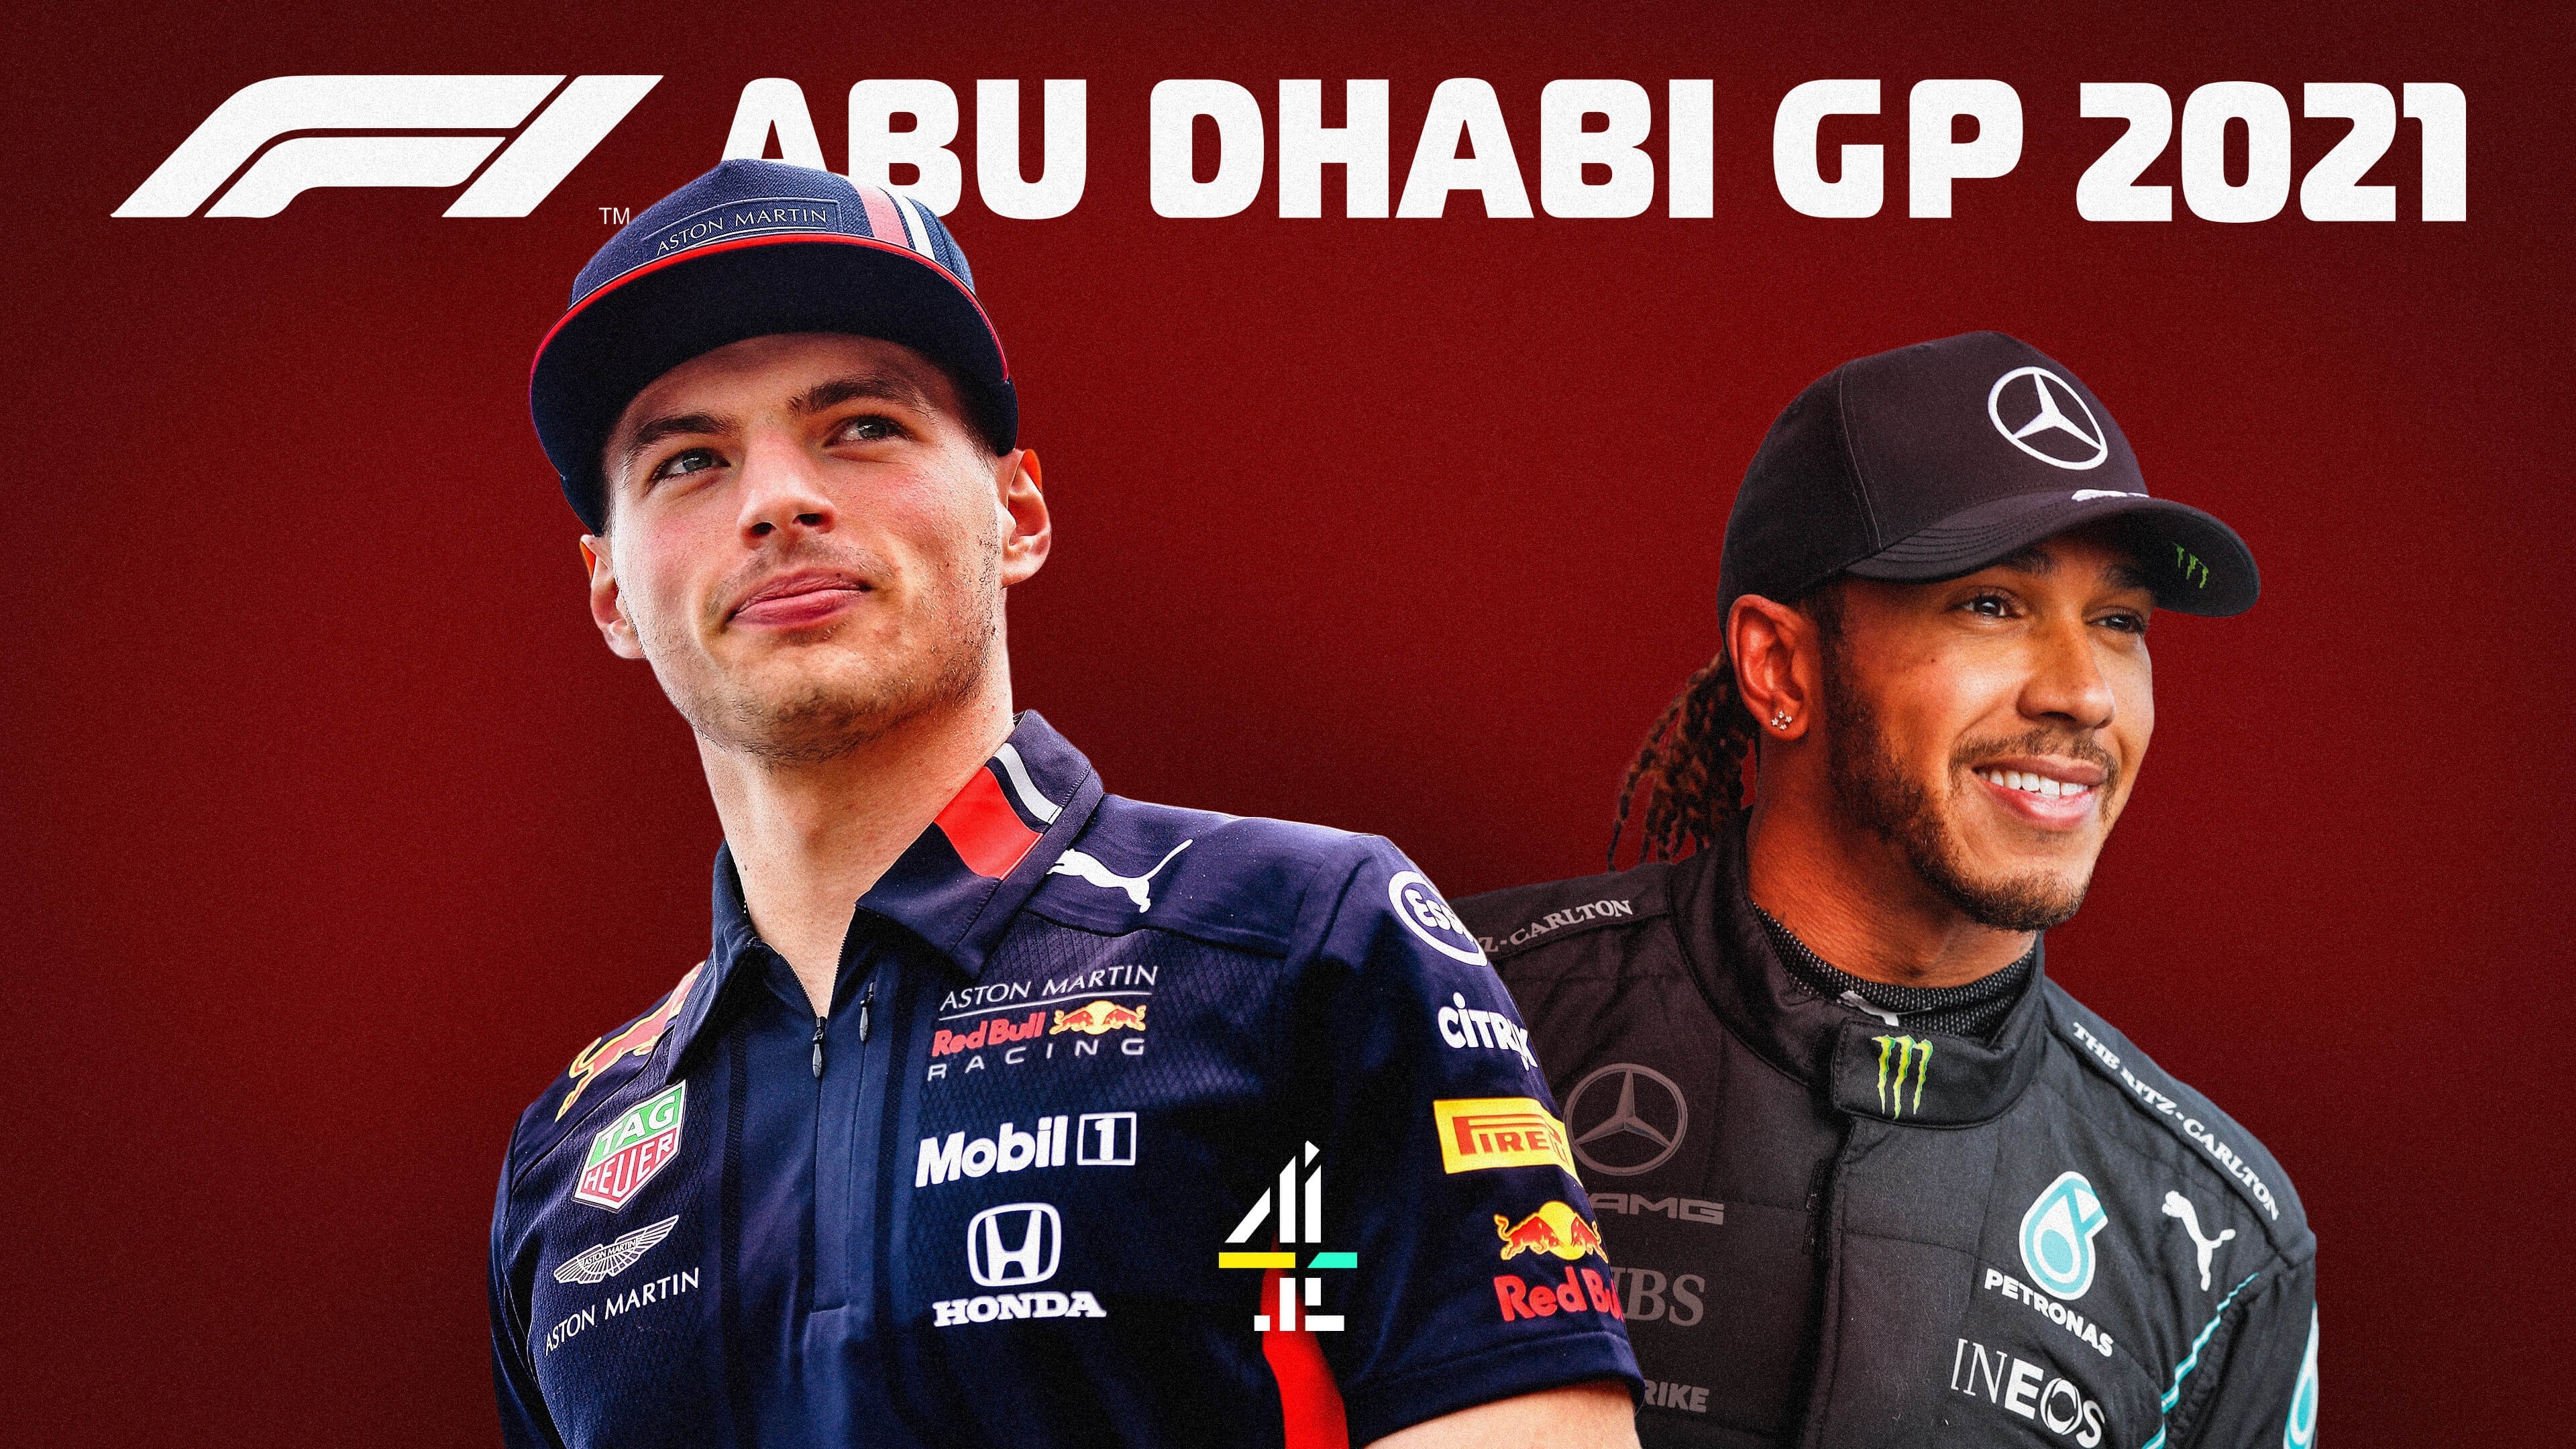 Lewis Hamilton and Max Verstappen in racing gear - with the title 'Abu Dhabi GP 2021'